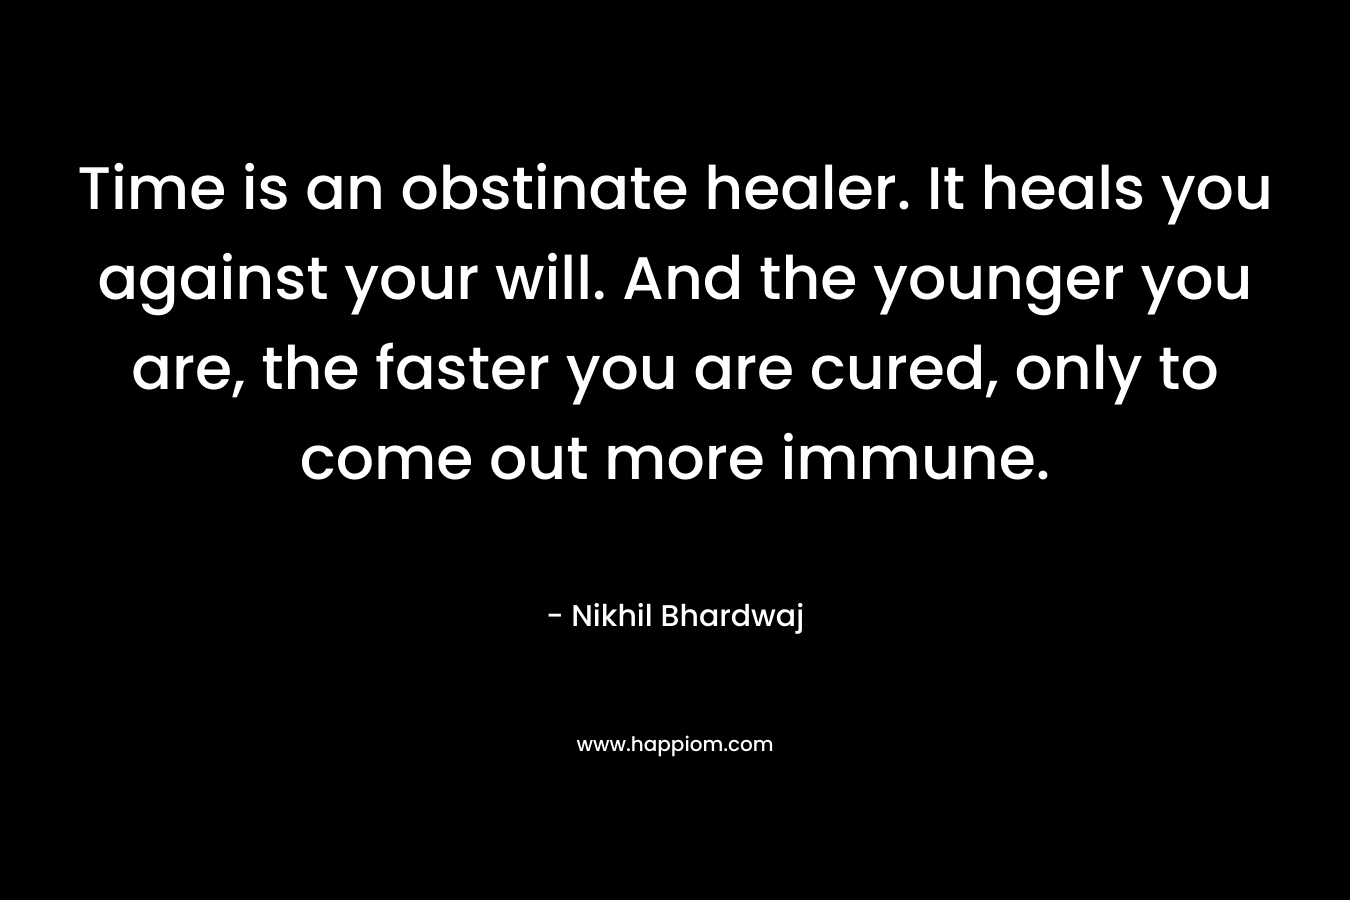 Time is an obstinate healer. It heals you against your will. And the younger you are, the faster you are cured, only to come out more immune. – Nikhil Bhardwaj